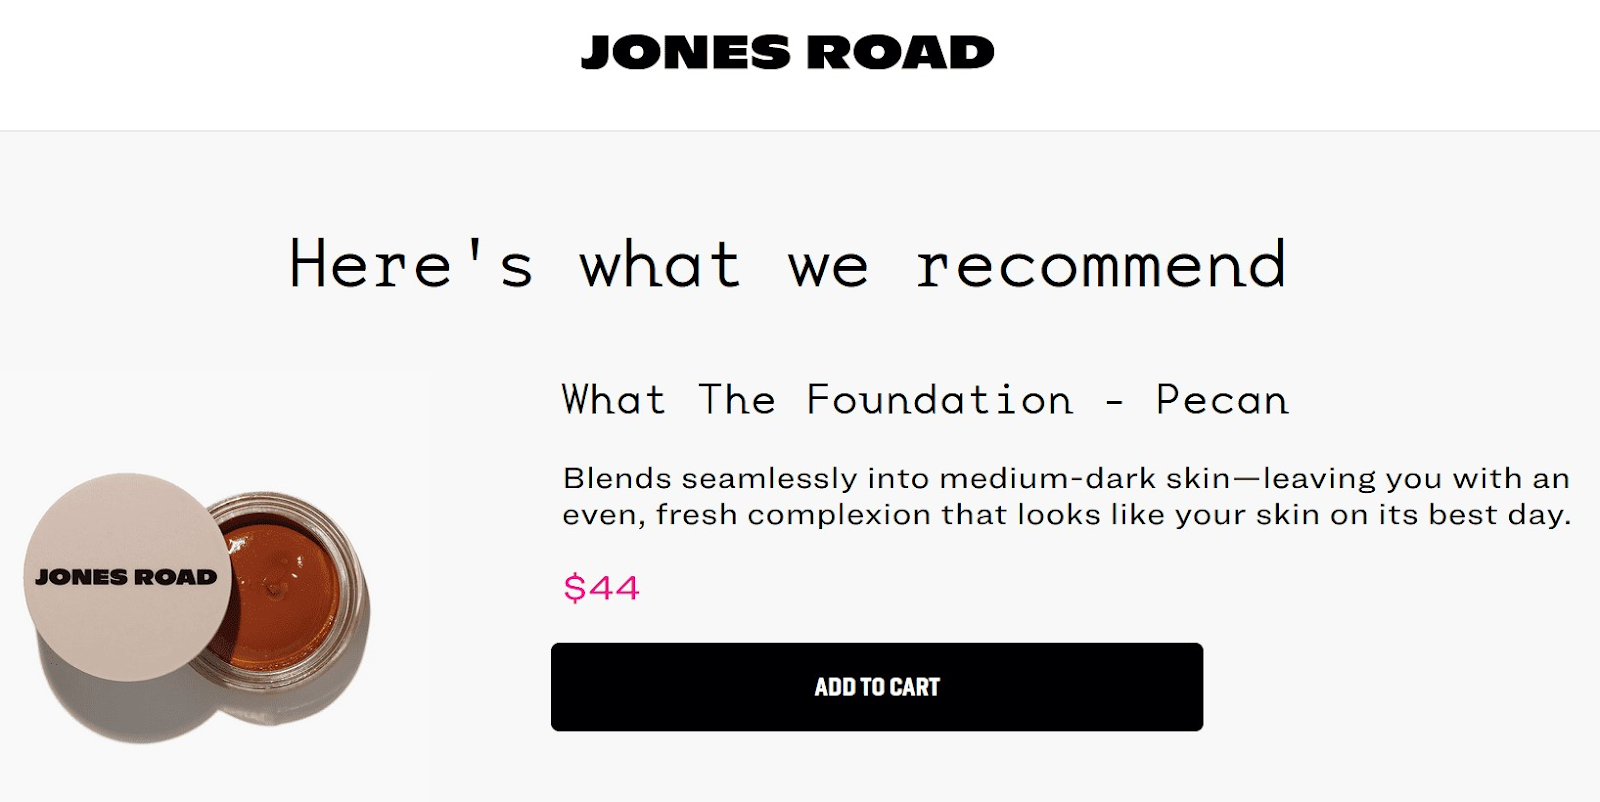 Jones Road's "Here's what we recommend" section